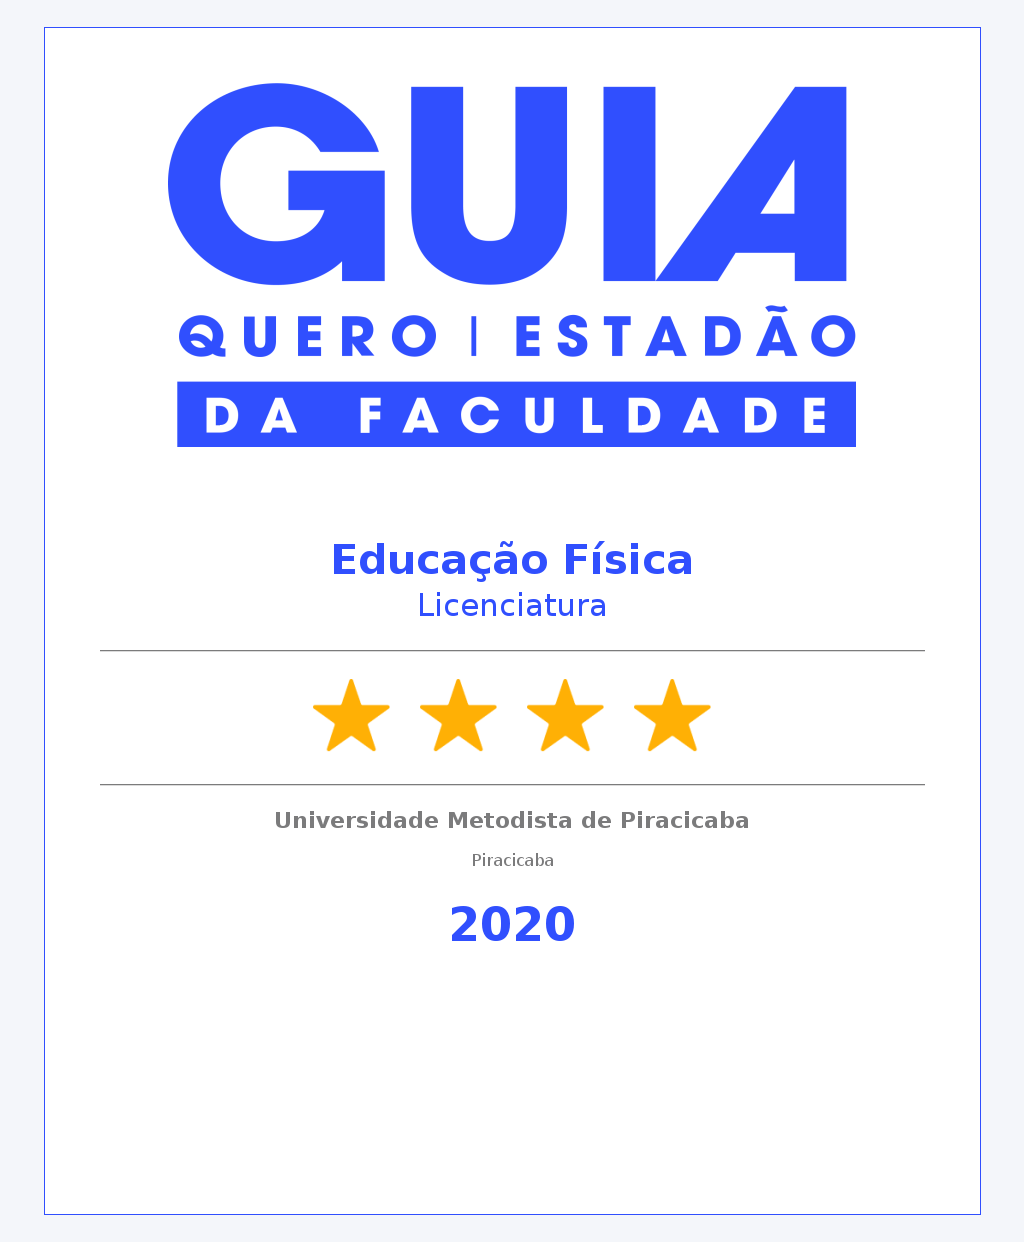 educacao fisica lc.png